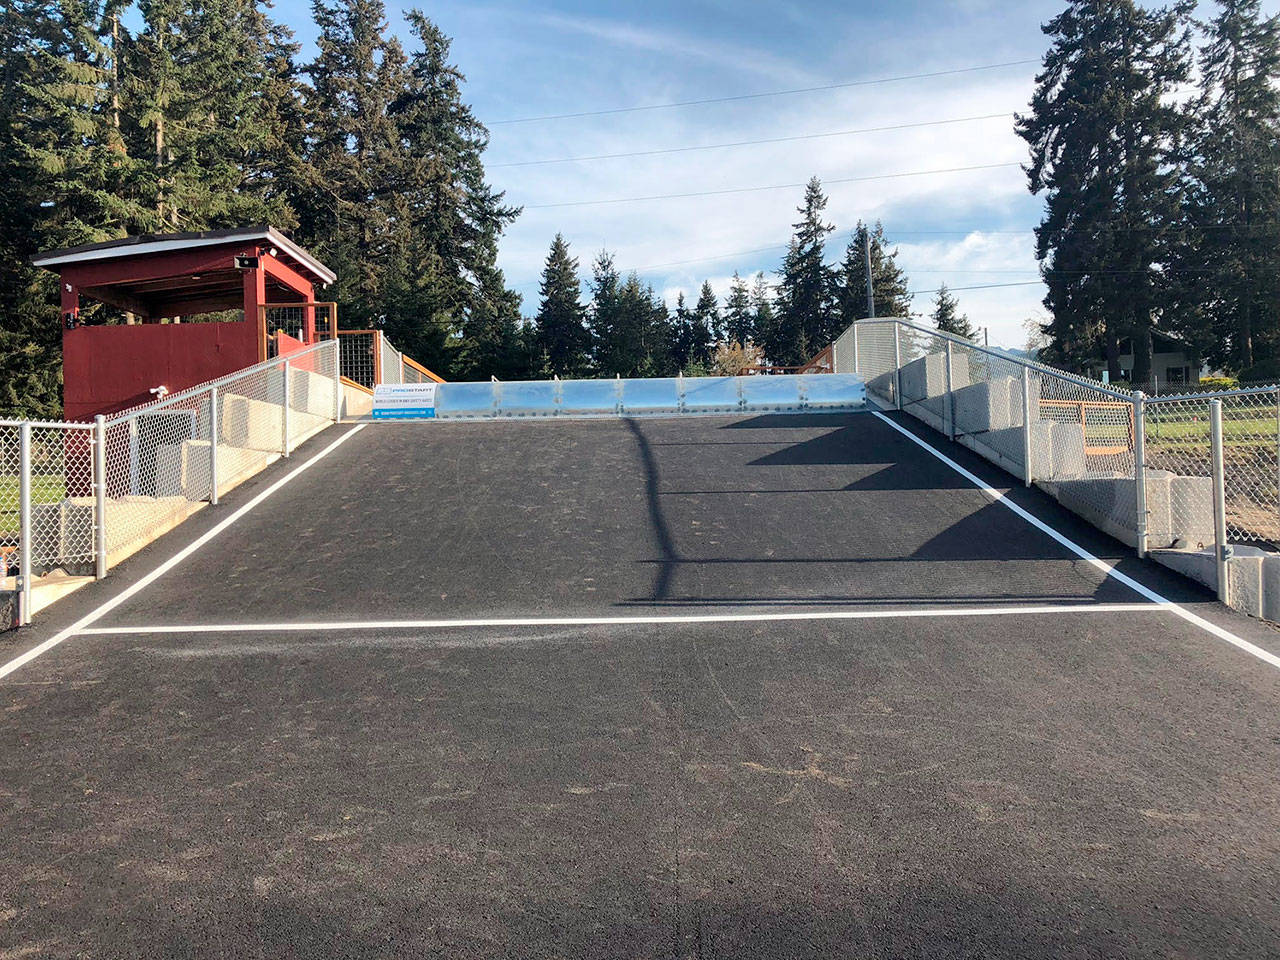 Crews have poured nearly 1,500 volunteer hours into rebuilding and renovating the starting hill along with other improvements at the city of Port Angeles-owned Lincoln Park BMX Track.                                Lincoln Park BMX Association